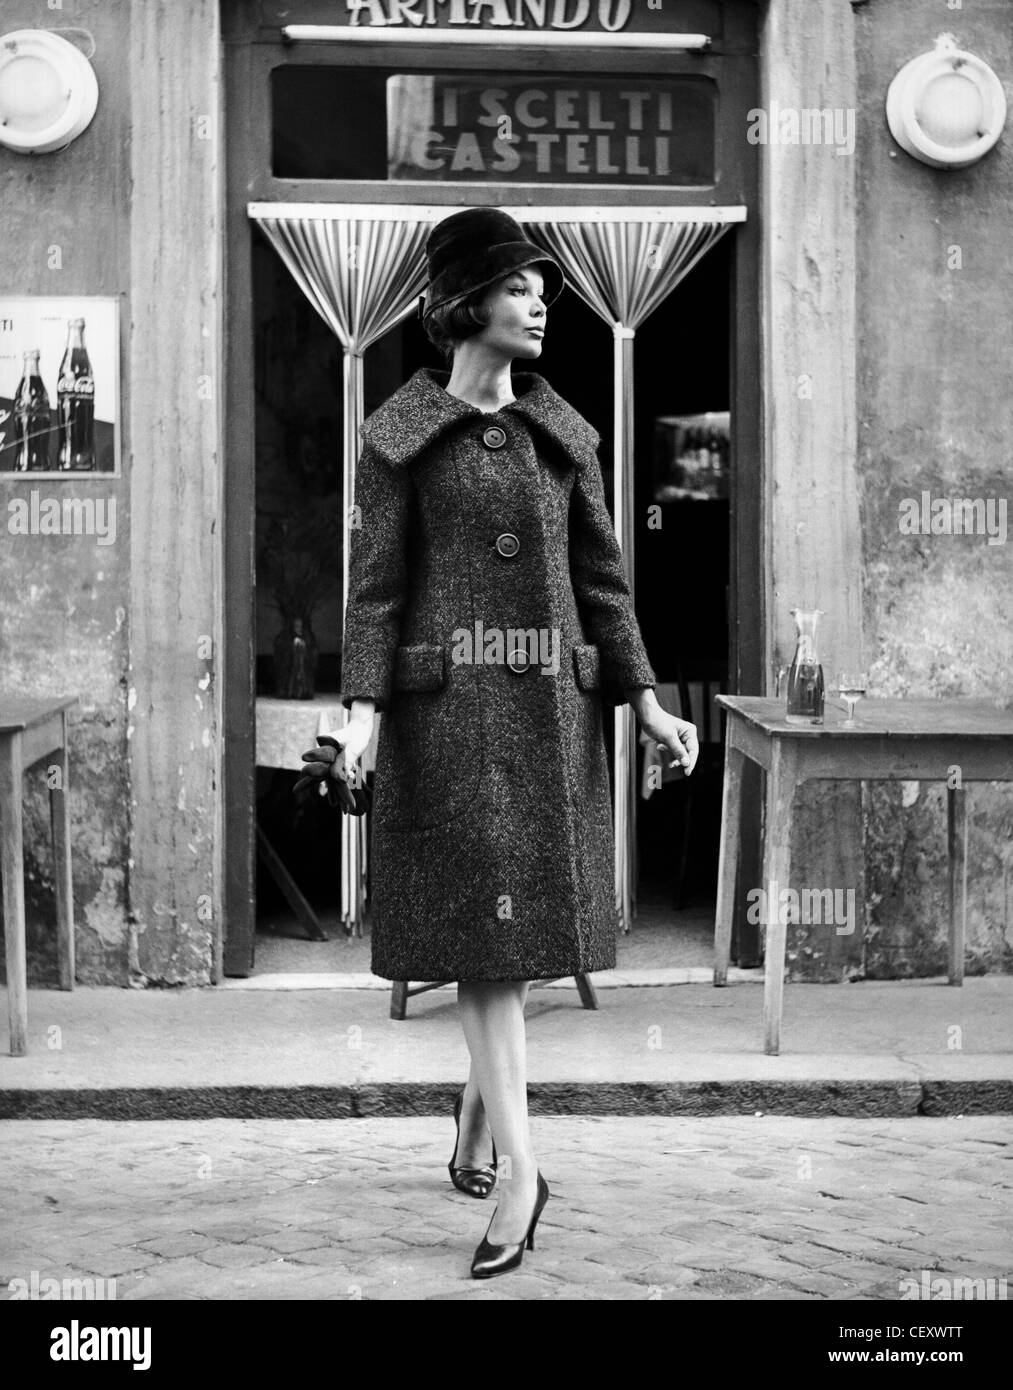 Luciani Female tweed coat with wide lapels, cloche hat and court shoes;  standing outside a shop in Rome, Italy Elsa Haertter Stock Photo - Alamy